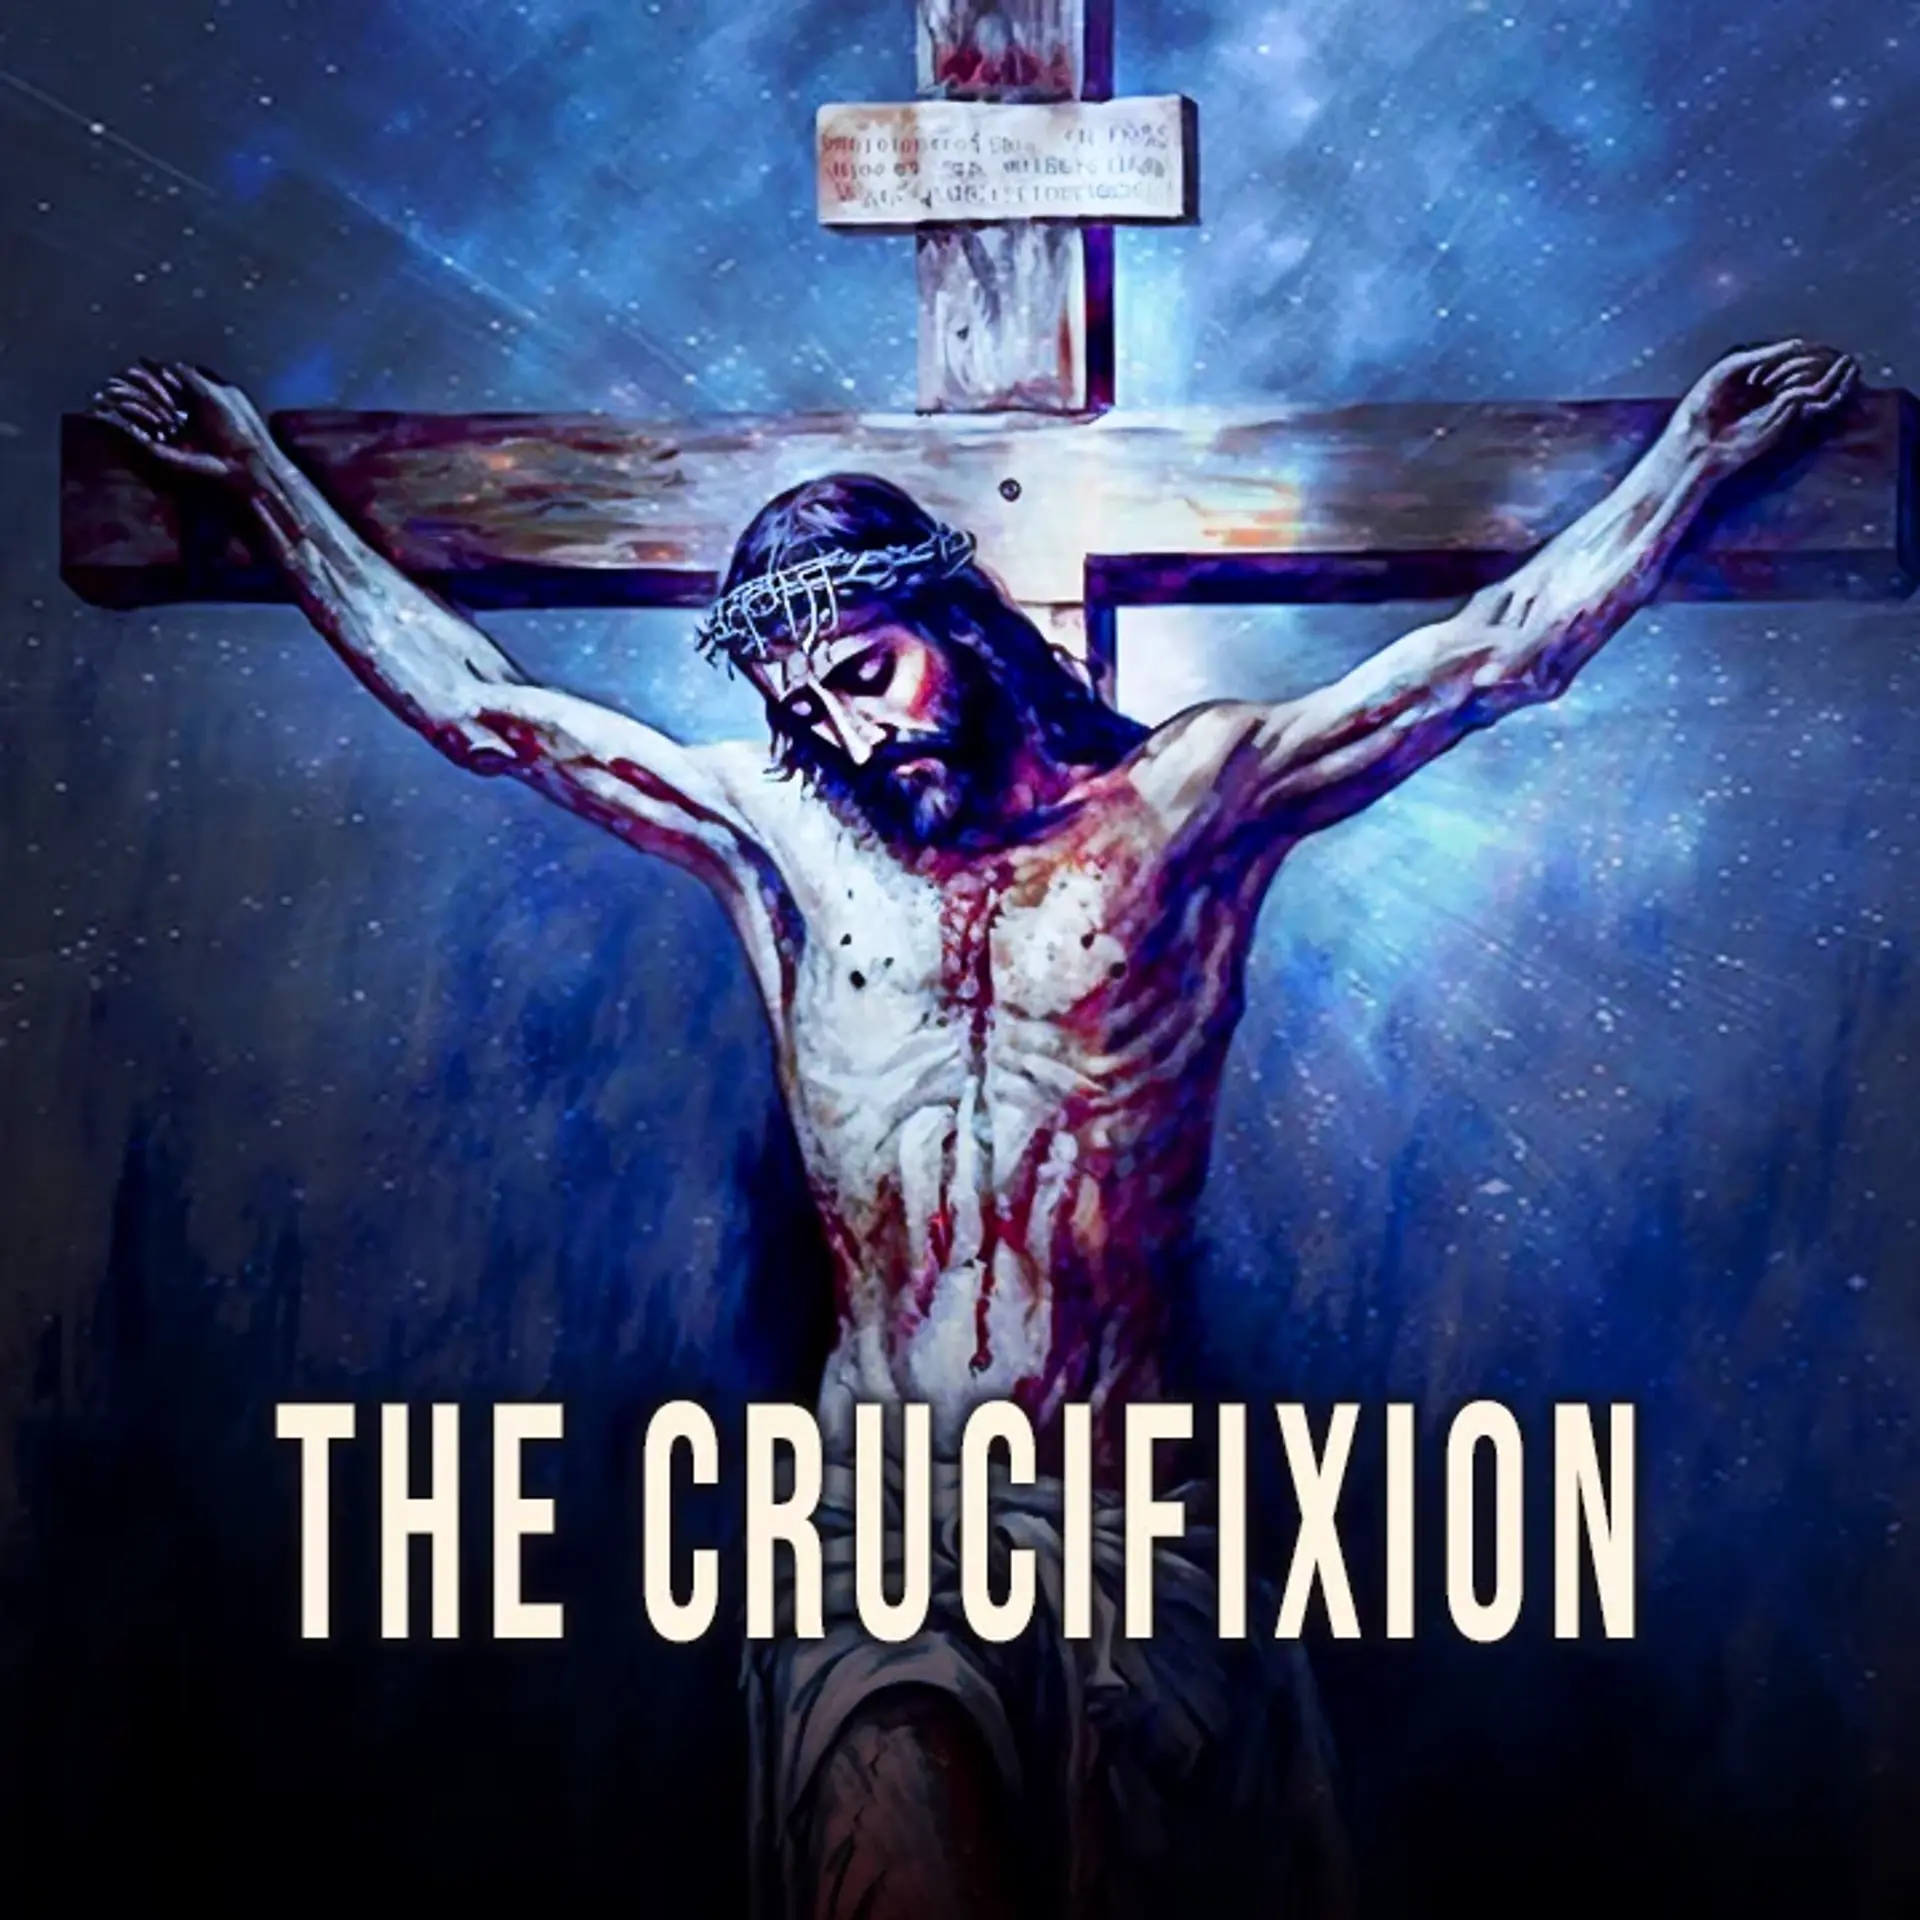 5. The Crucifixion